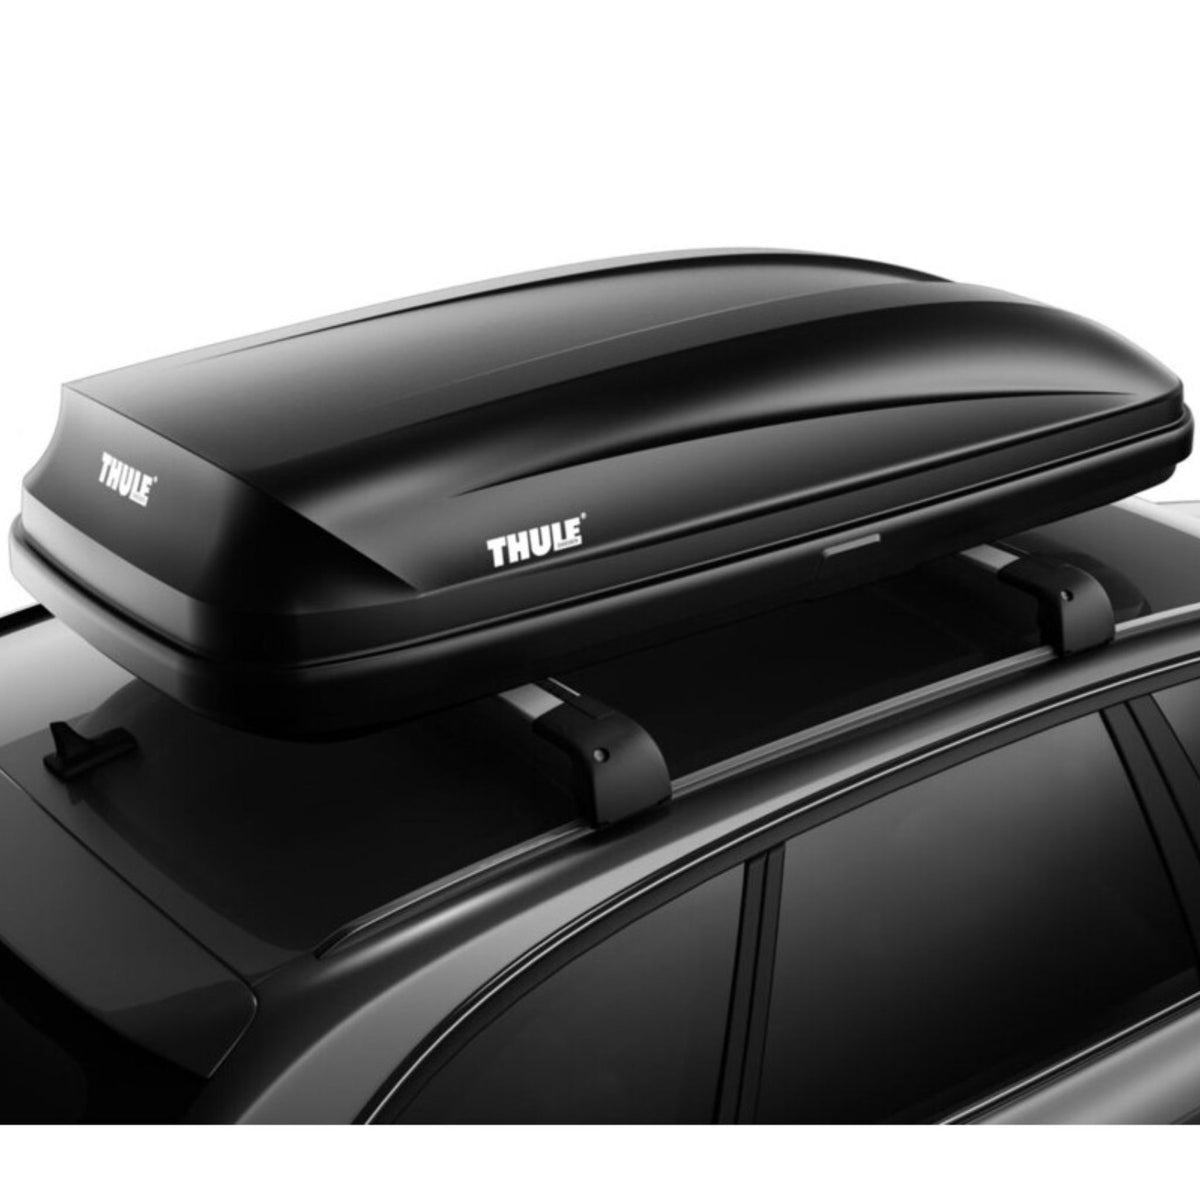 Thule Pulse Rooftop Cargo Box - Large - 615